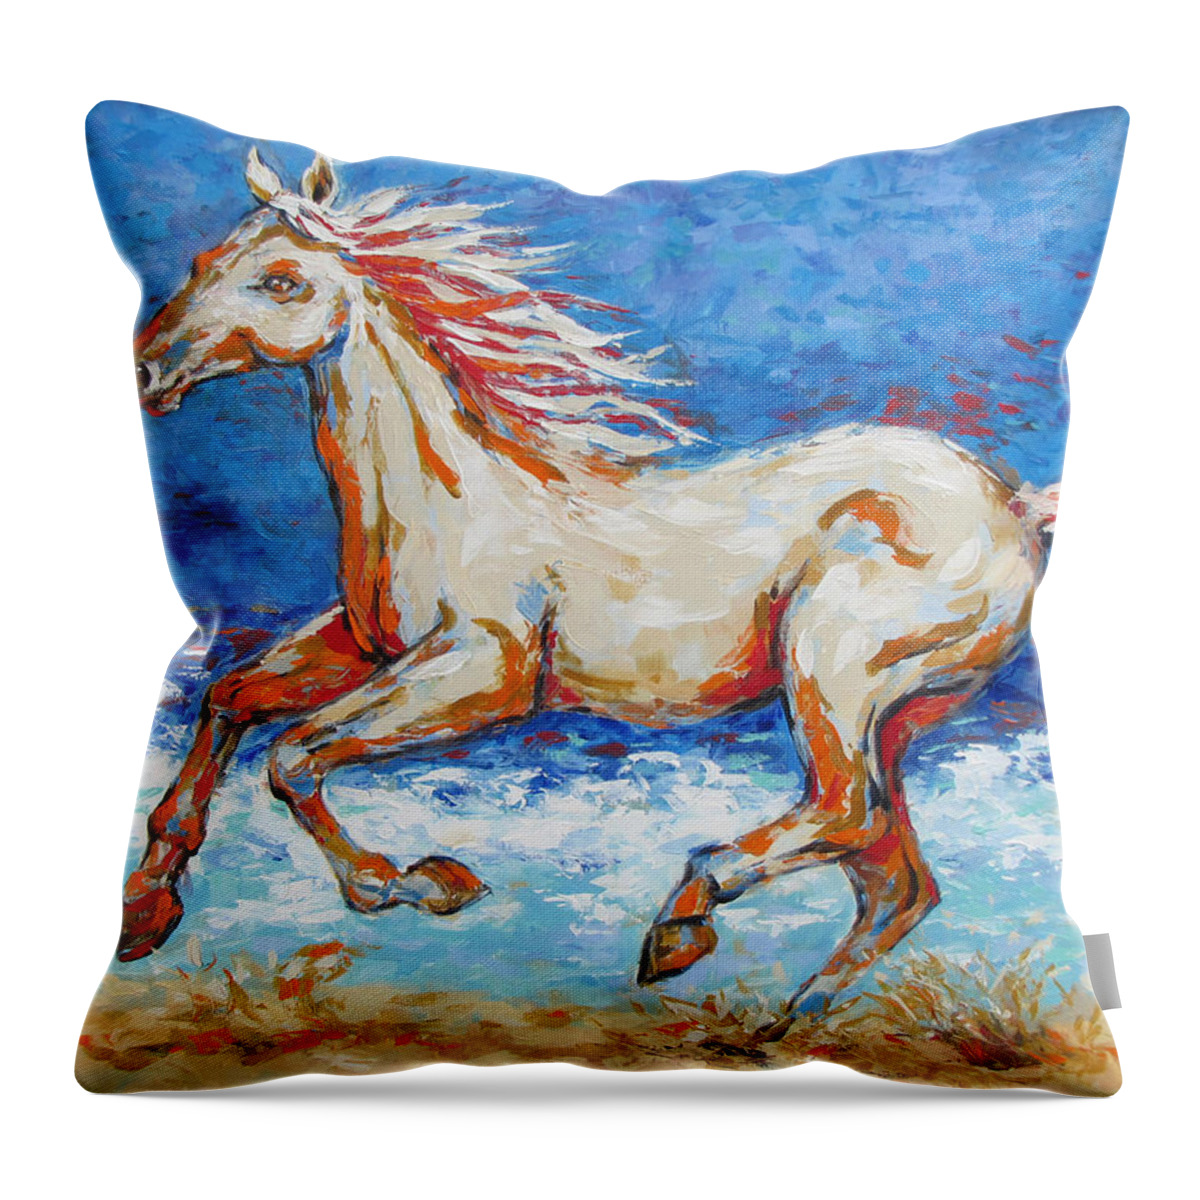  Beach Throw Pillow featuring the painting Galloping Horse on Beach by Jyotika Shroff